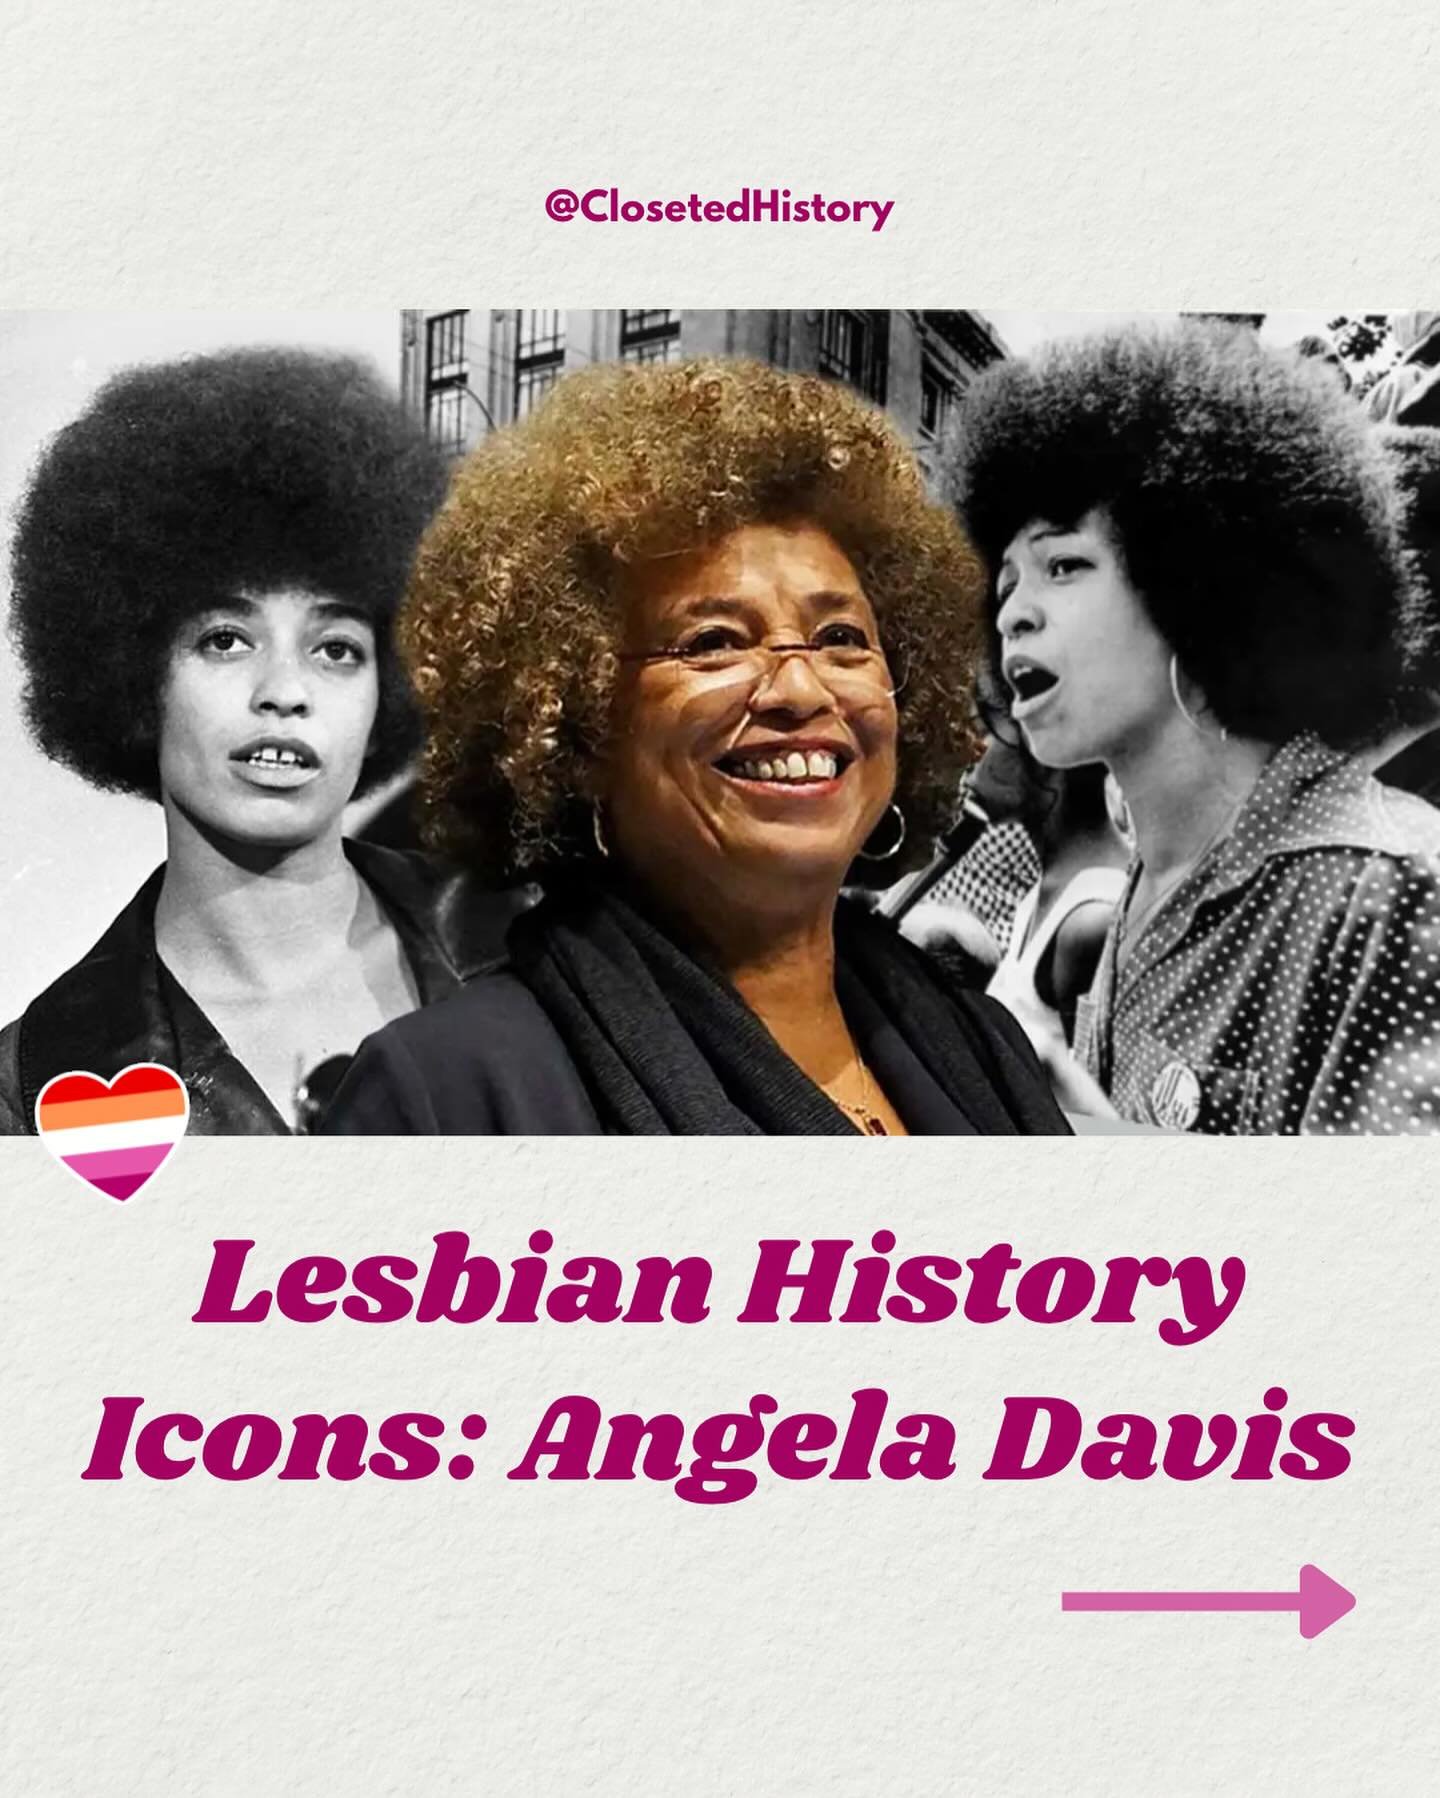 Angela Davis is my gay commie hero 🧡🩷🤍 

#AngelaDavis #LesbianHistory #lesbianvisibilityweek #wlw #anticapitalist 

Photo ID: a IG carousel post with a plaster background with dark pink text 

Slide 1: three photos of Angela Davis, two are black a